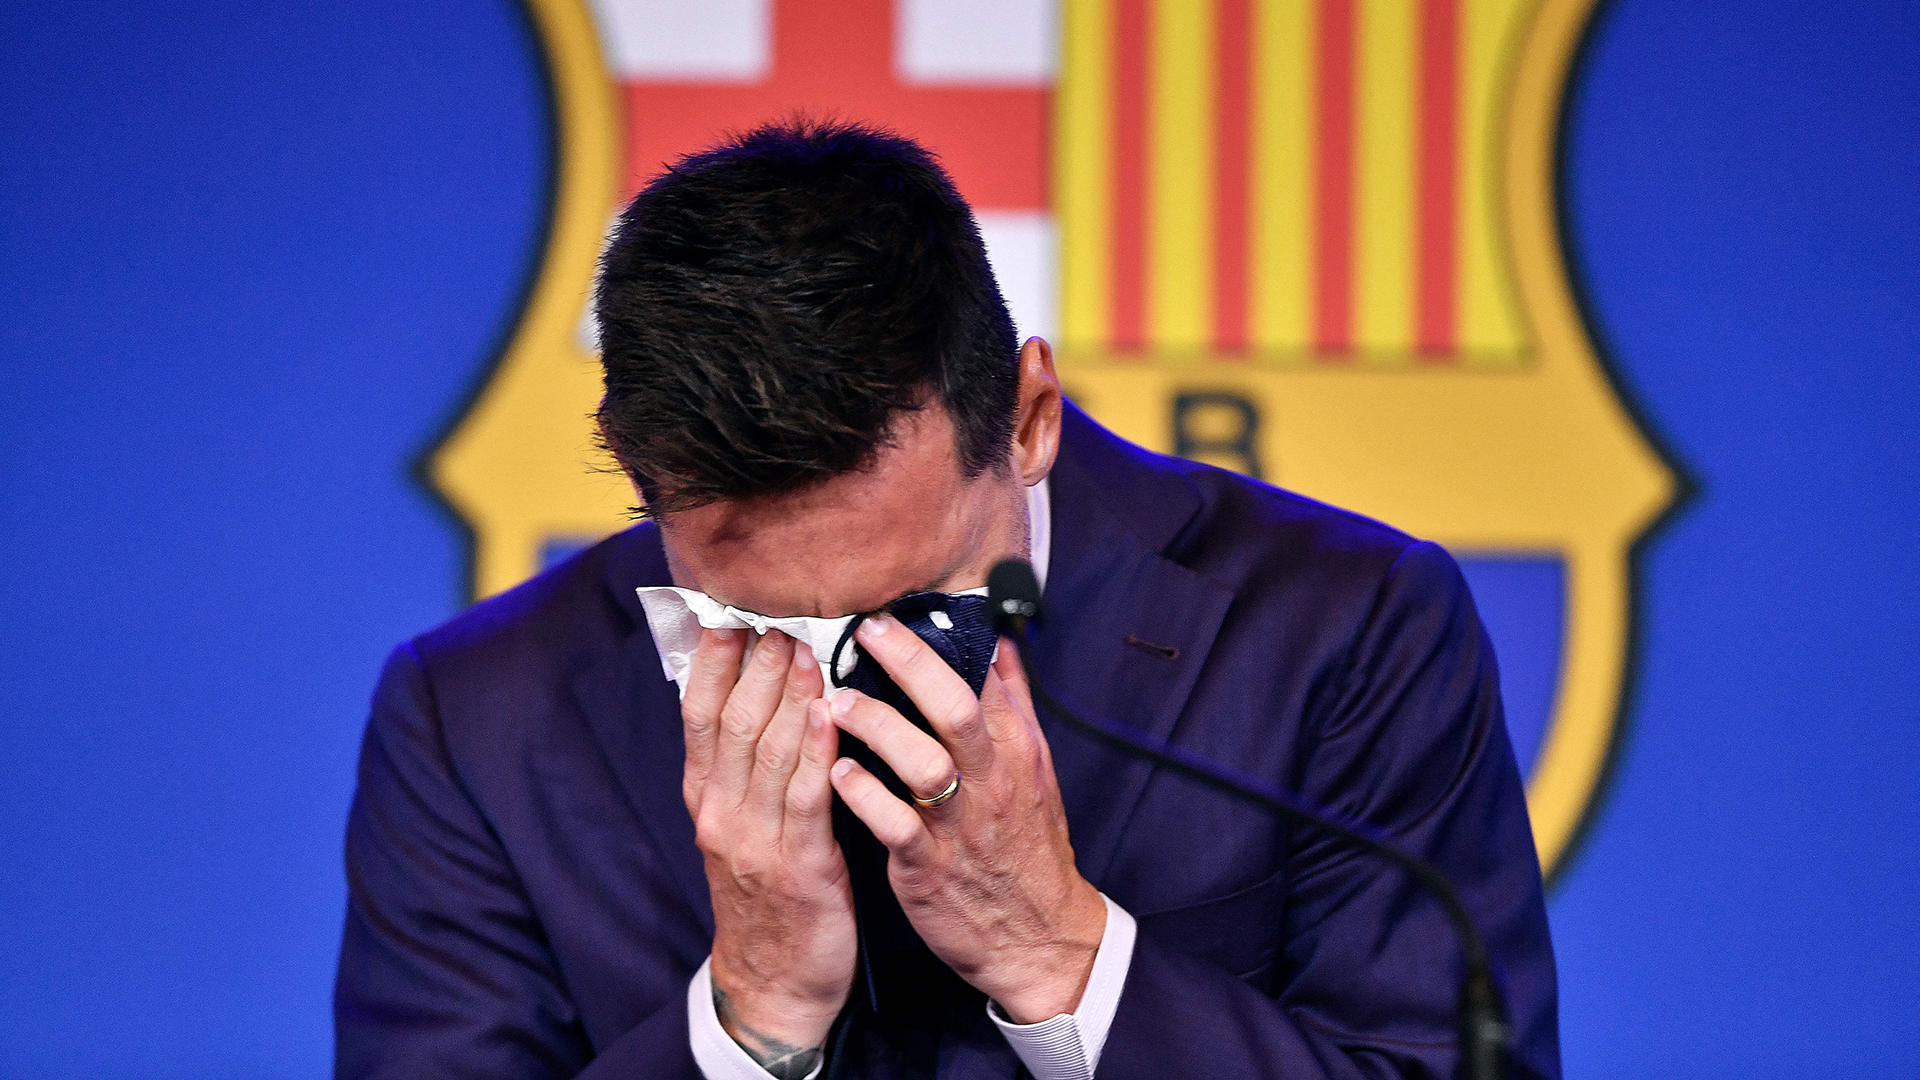 Fan View: Must he always play at Barcelona? - Mixed reactions after Messi's emotional presser